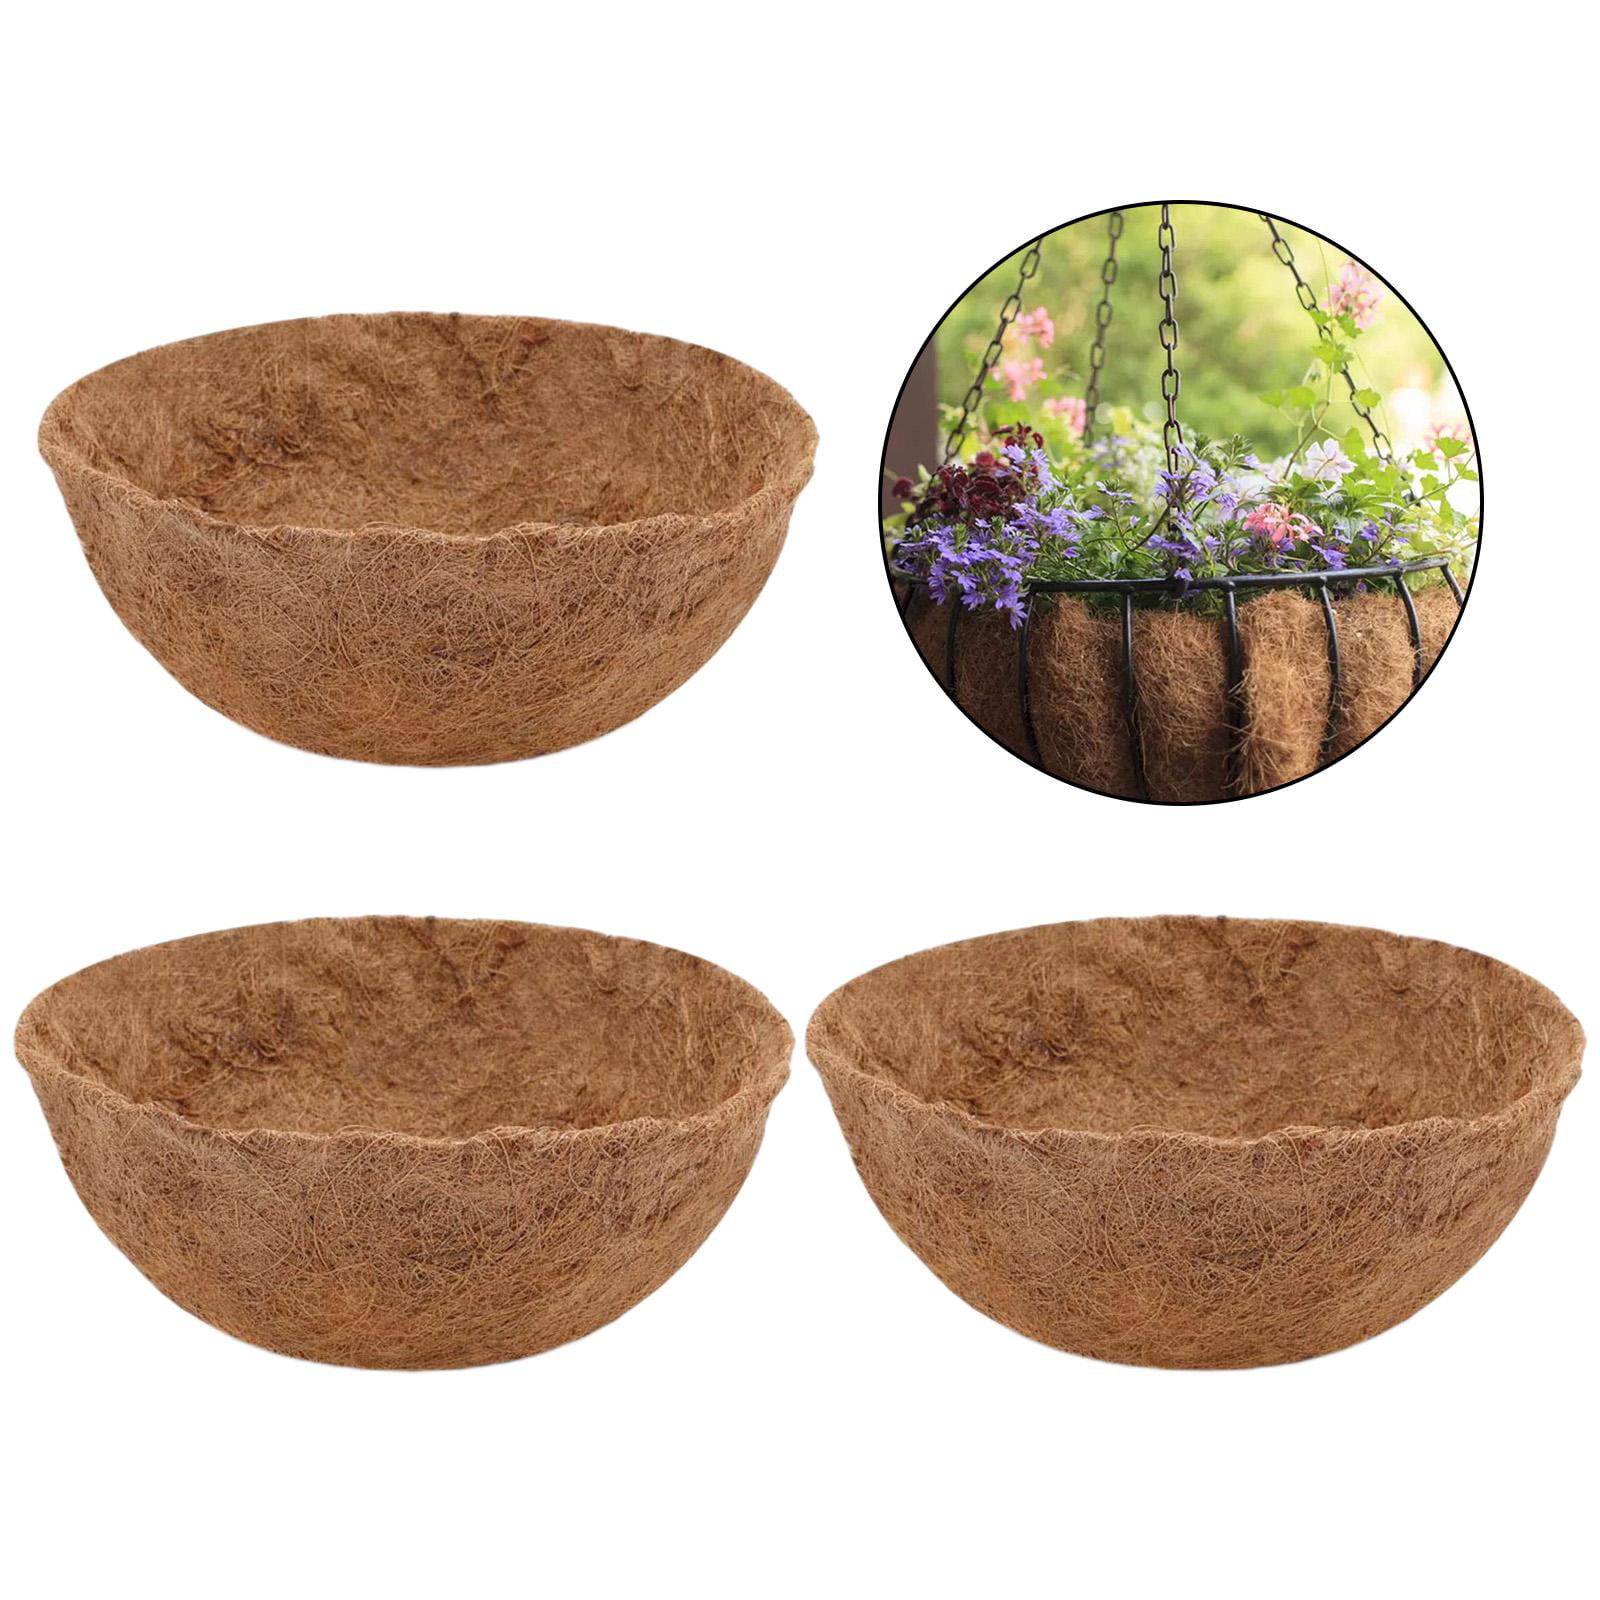 Riverhighfur 3 Packs Round Coco Fiber Natural Circle Coconut Fiber Replacement Liners Outdoor Garden Coco Liners for Wall Planters and Flower Pot Set 1 